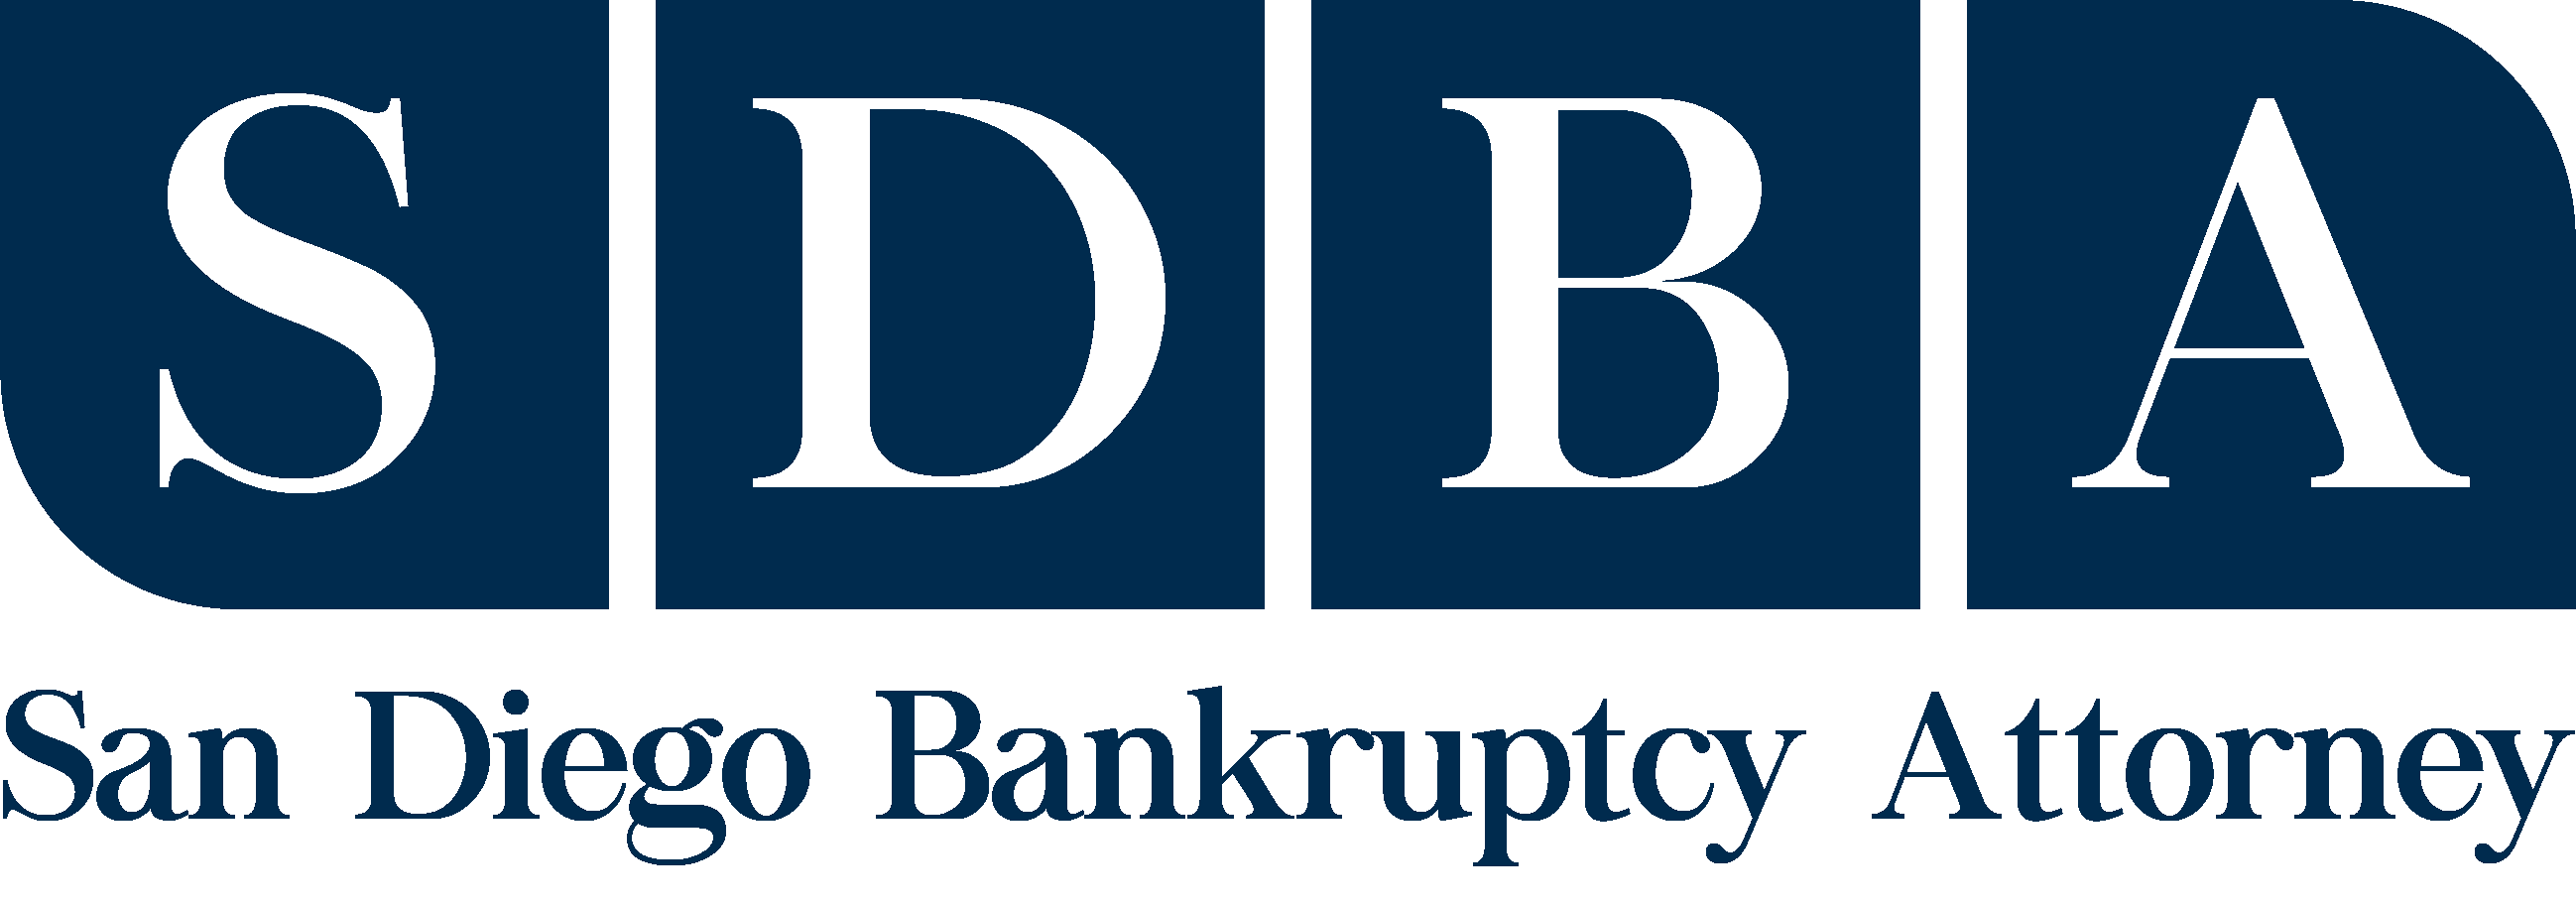 What You Need to Know About Bankruptcy Laws in San Diego